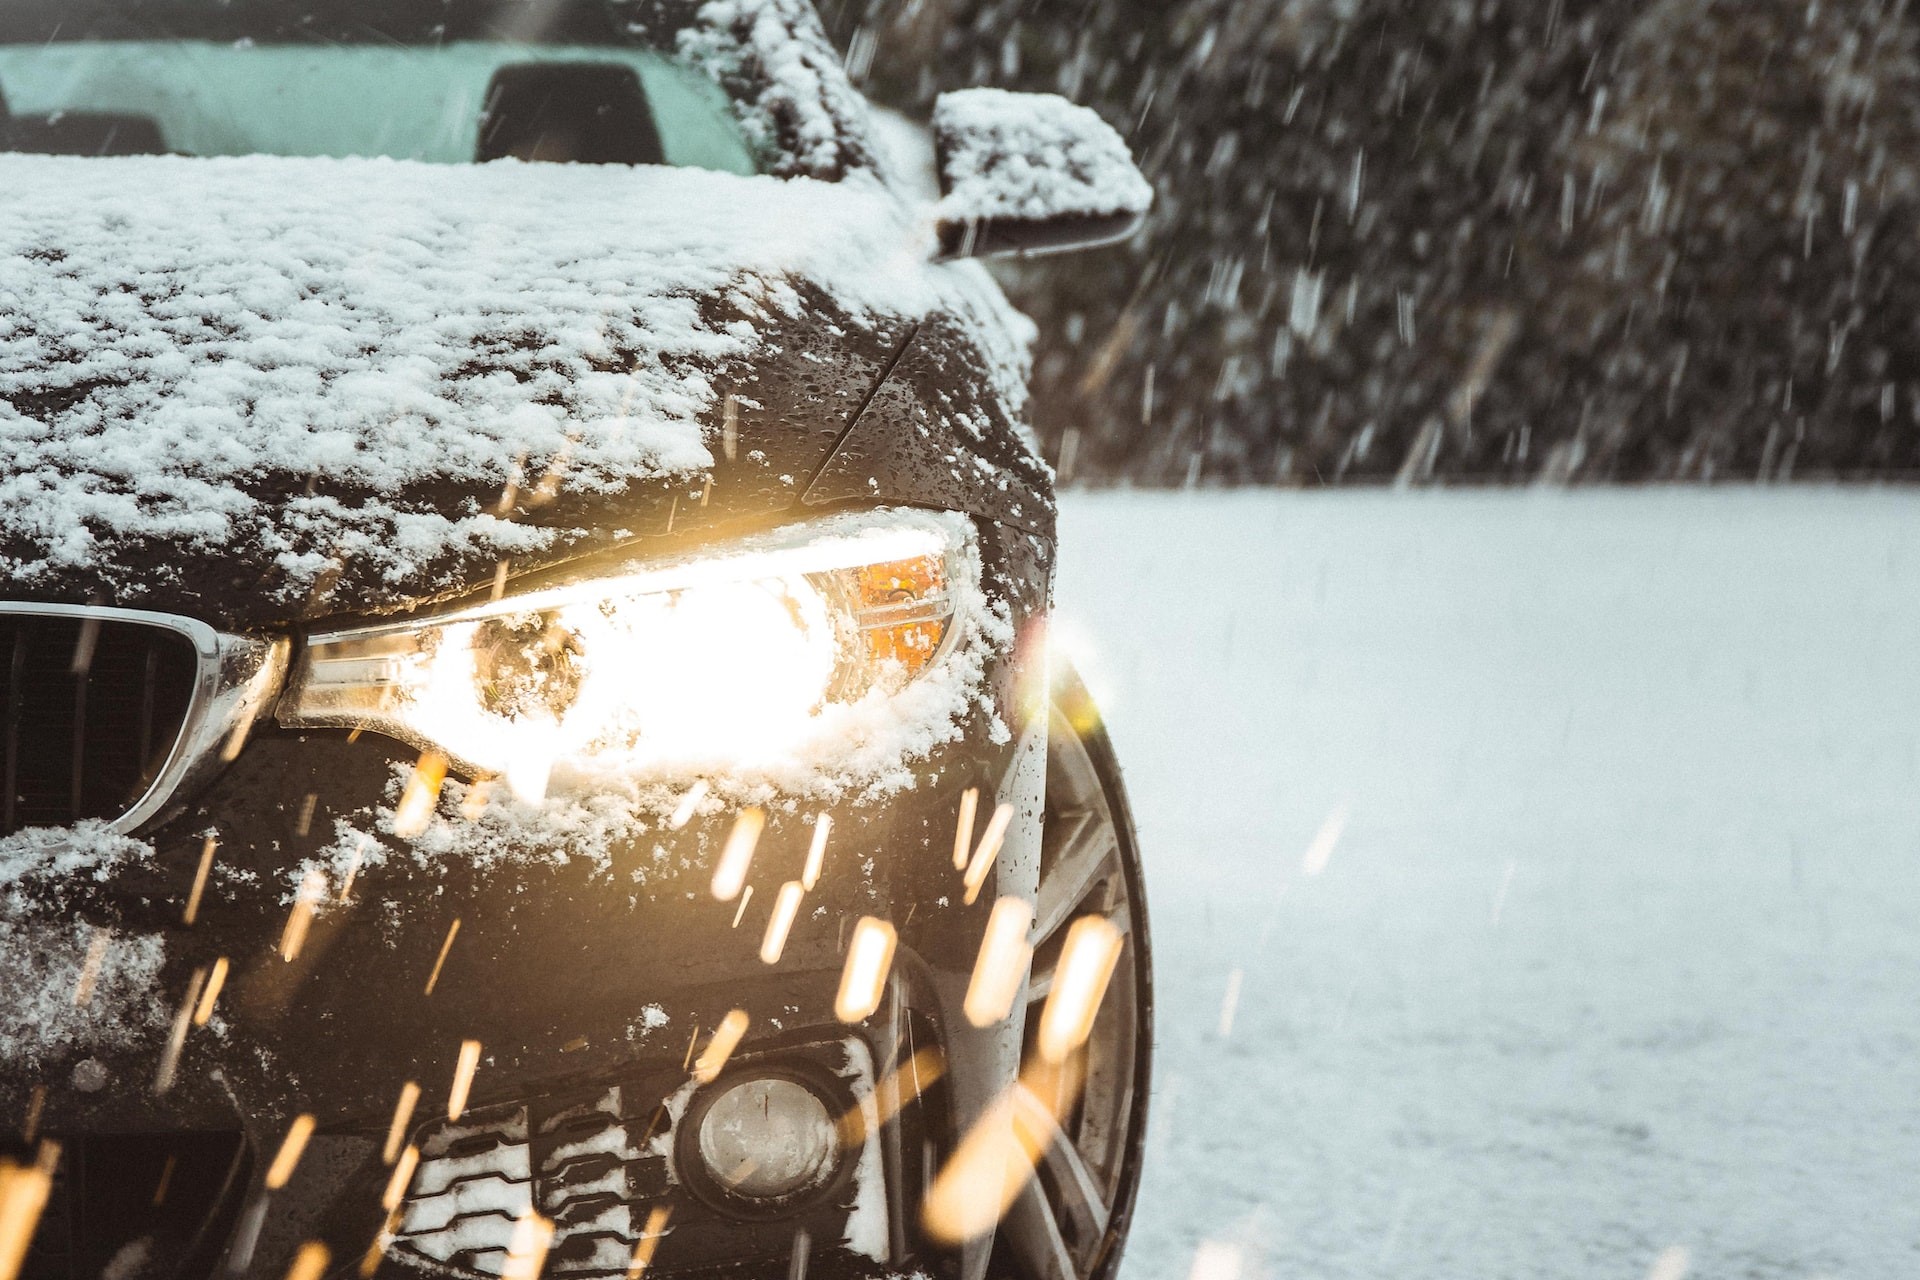 The Ultimate Winter Car Kit: Protecting your car from the weather doesn’t have to be complicated